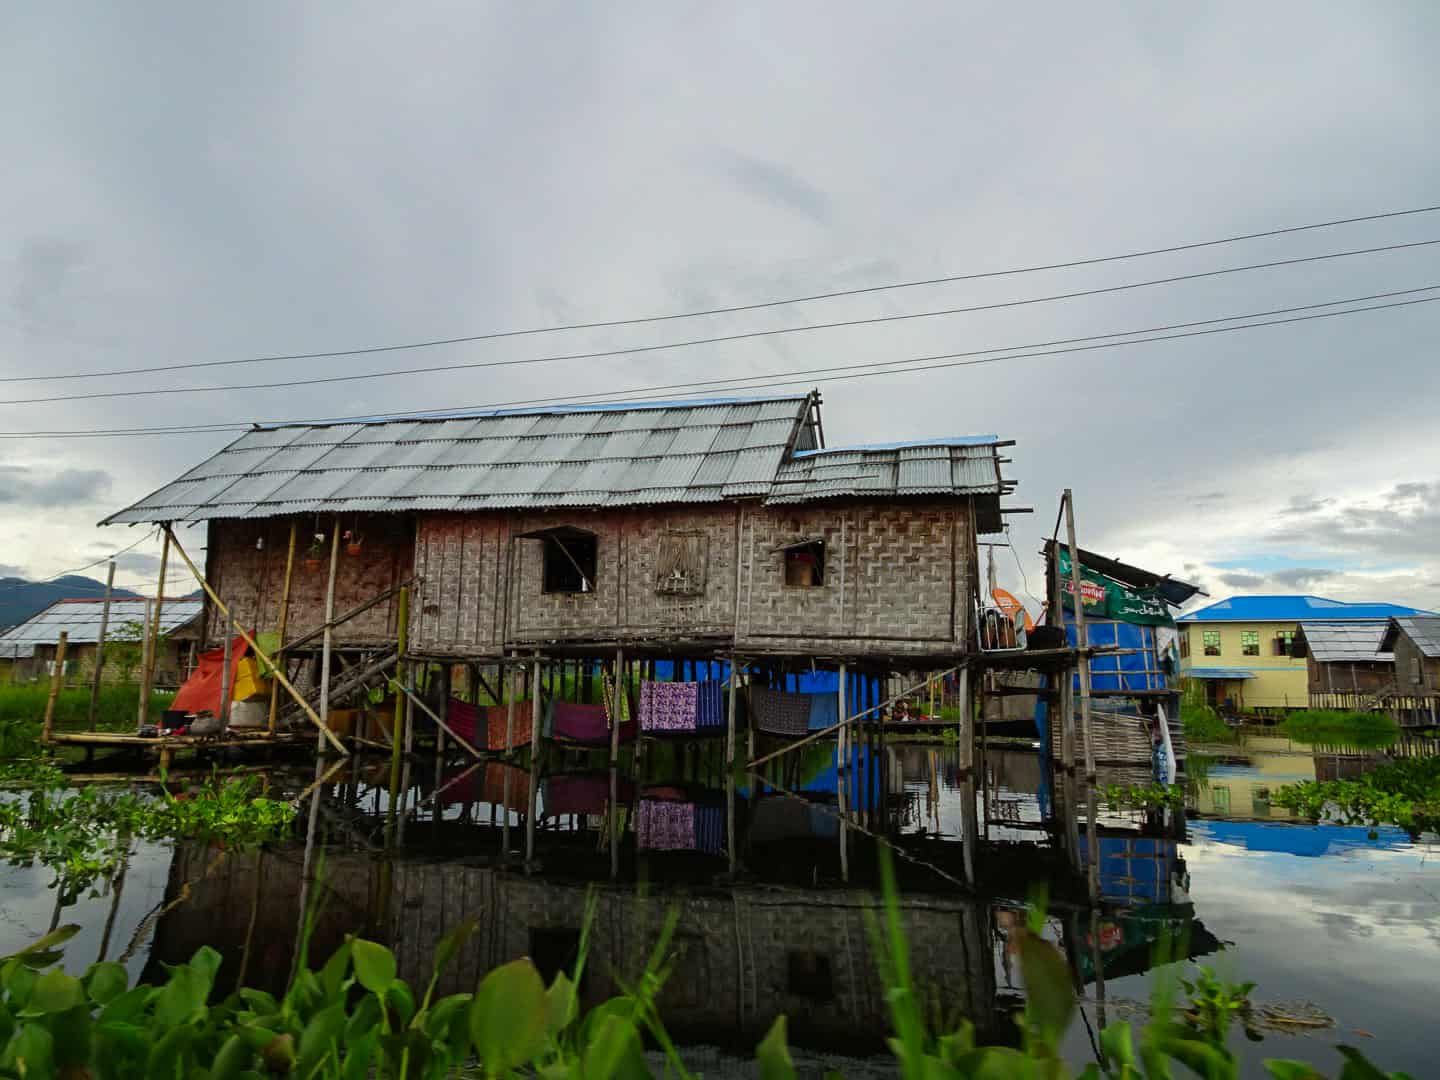 Many people live in houses on stilts on Myanmar's Inle Lake